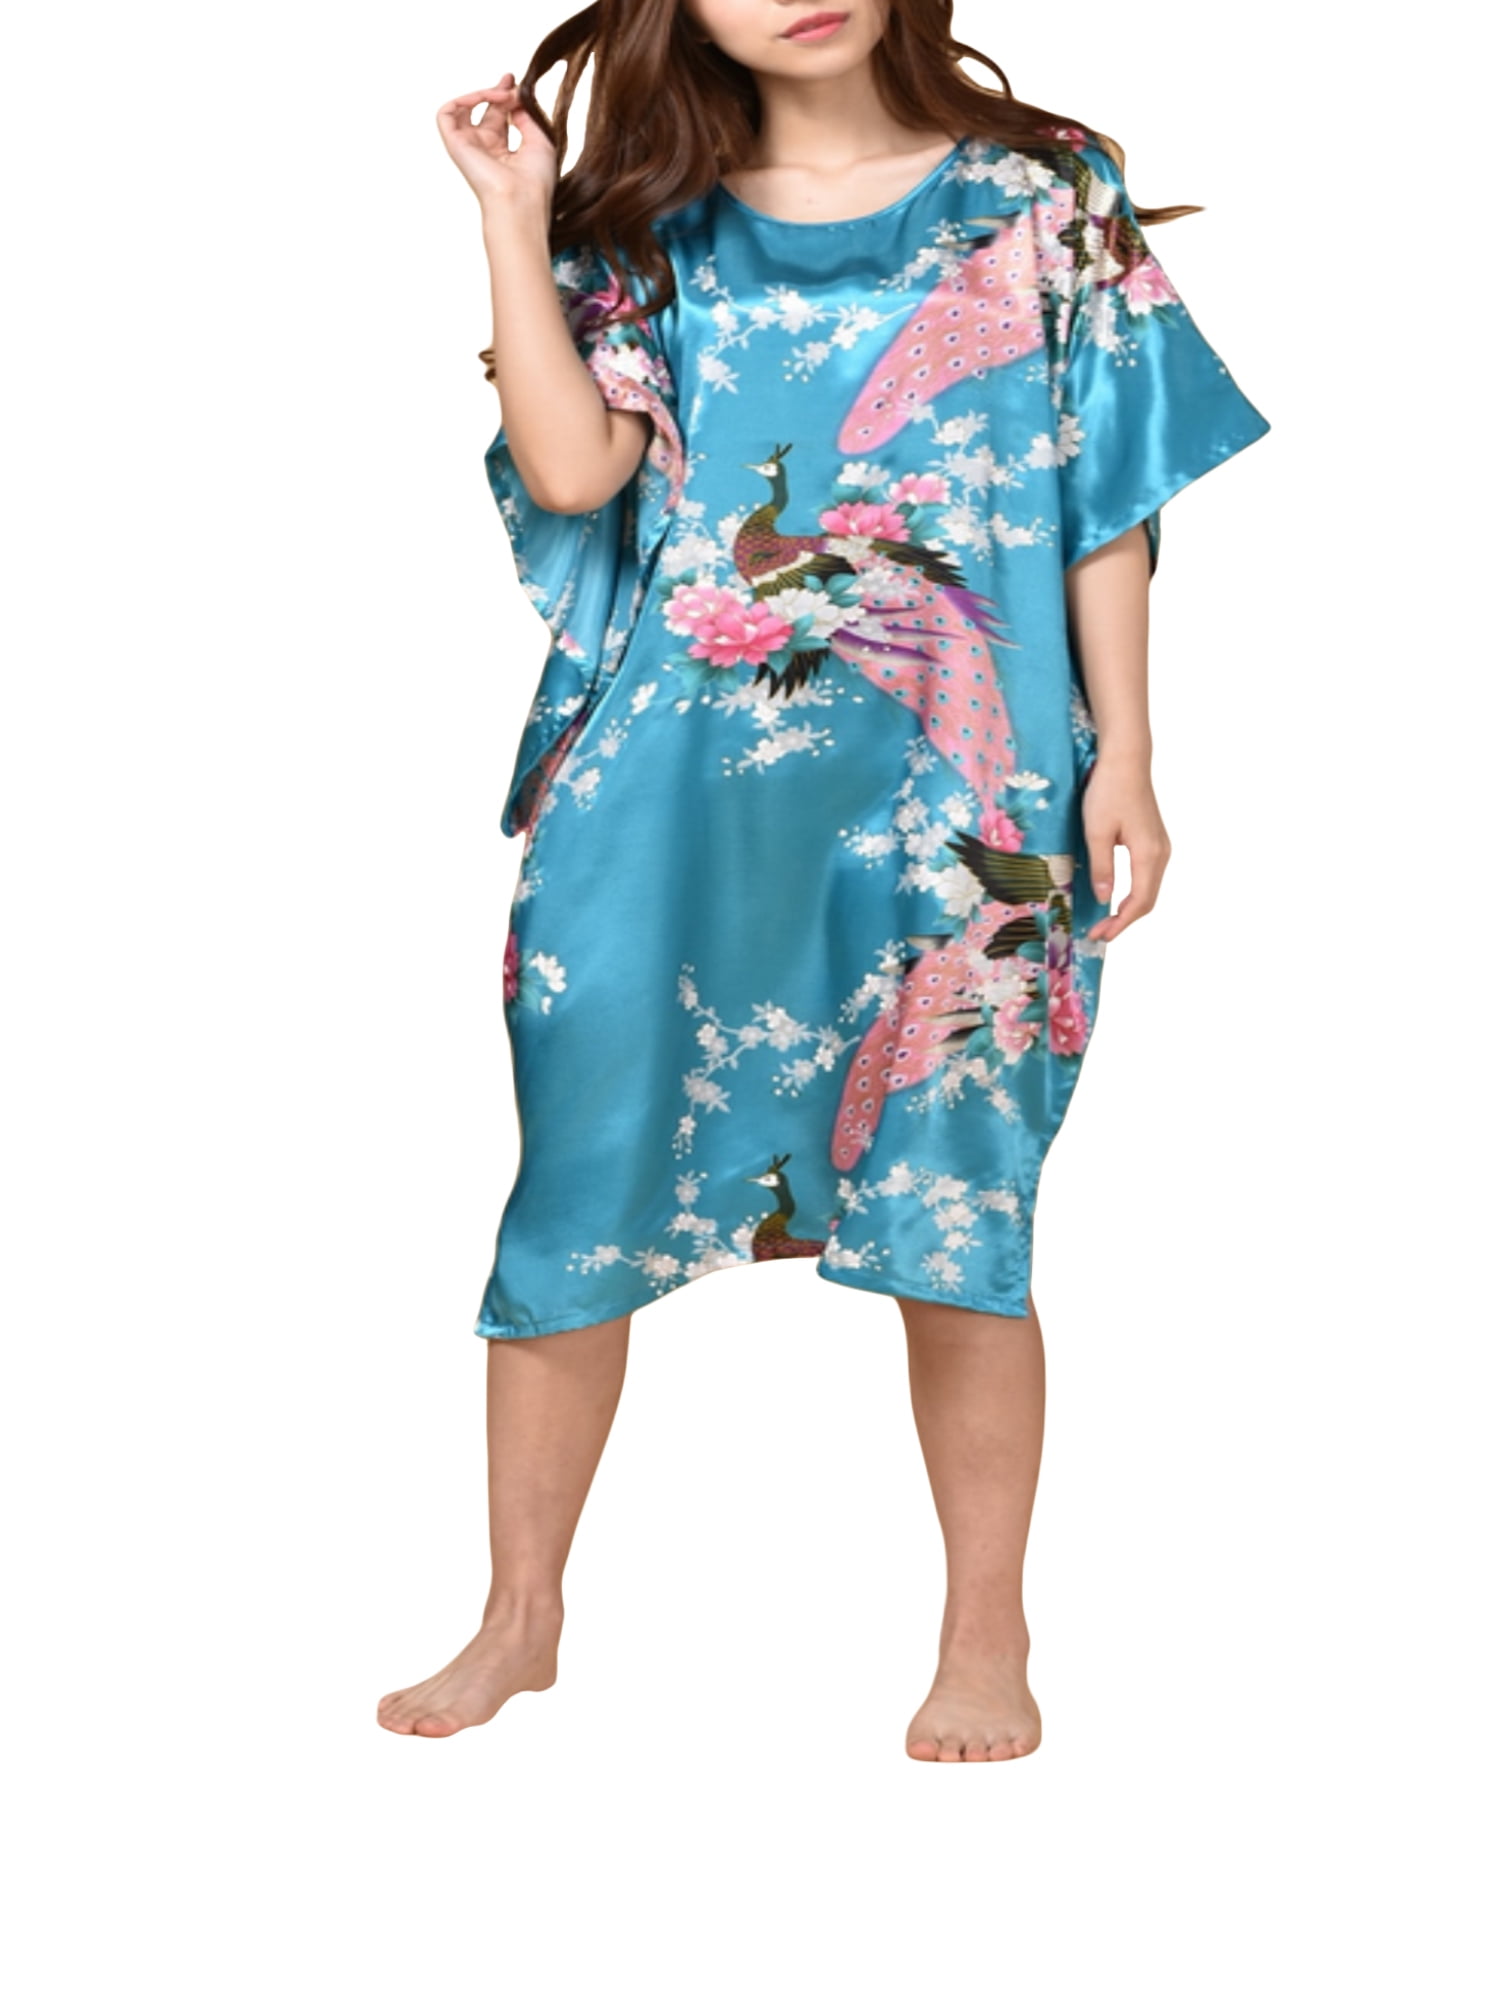 One Size Fits up to 16/18 Floral Print Kaftan Sleepwear Womens Satin Nightgown